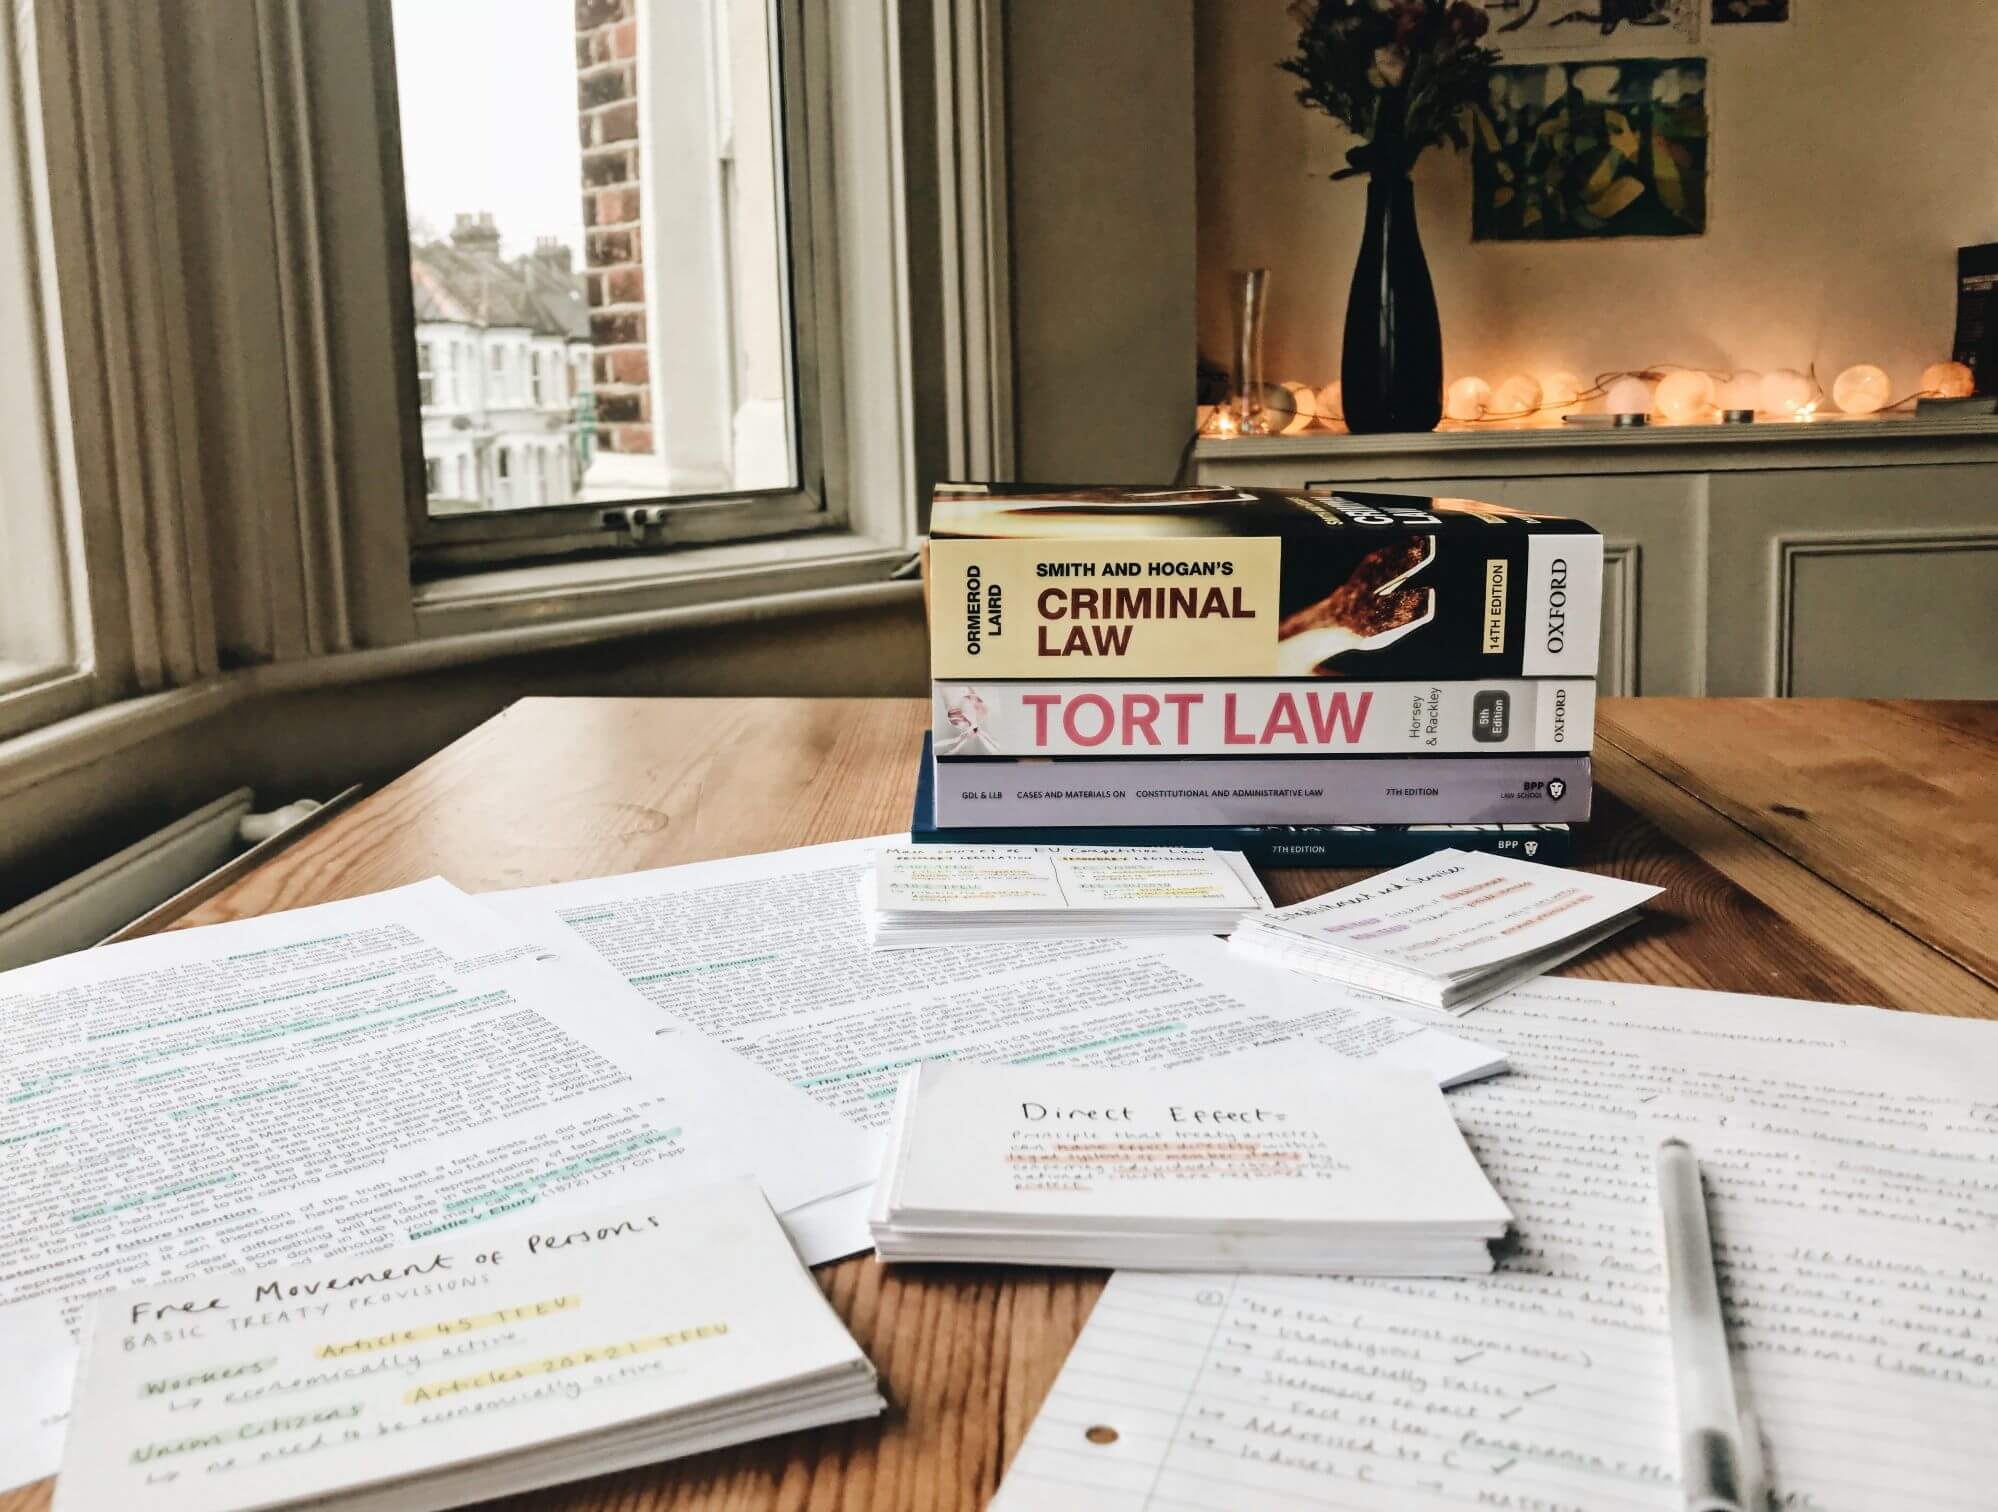 Day in the life of a law student